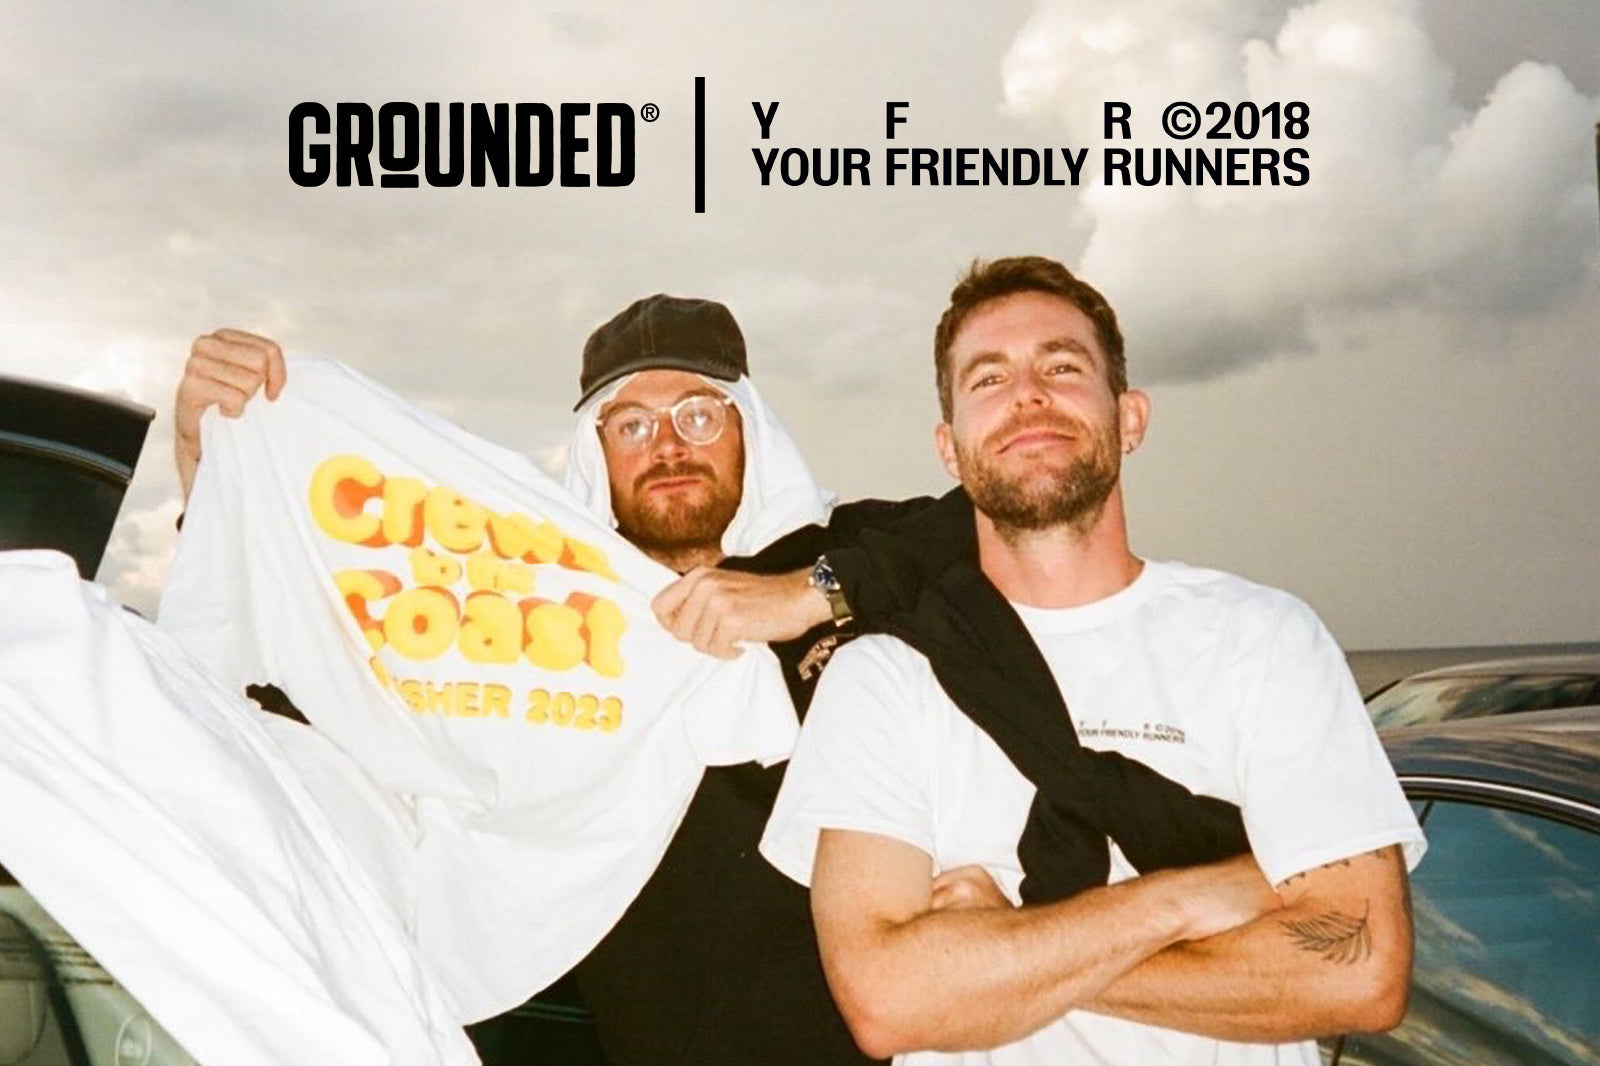 Friends of GROUNDED: Your Friendly Runners